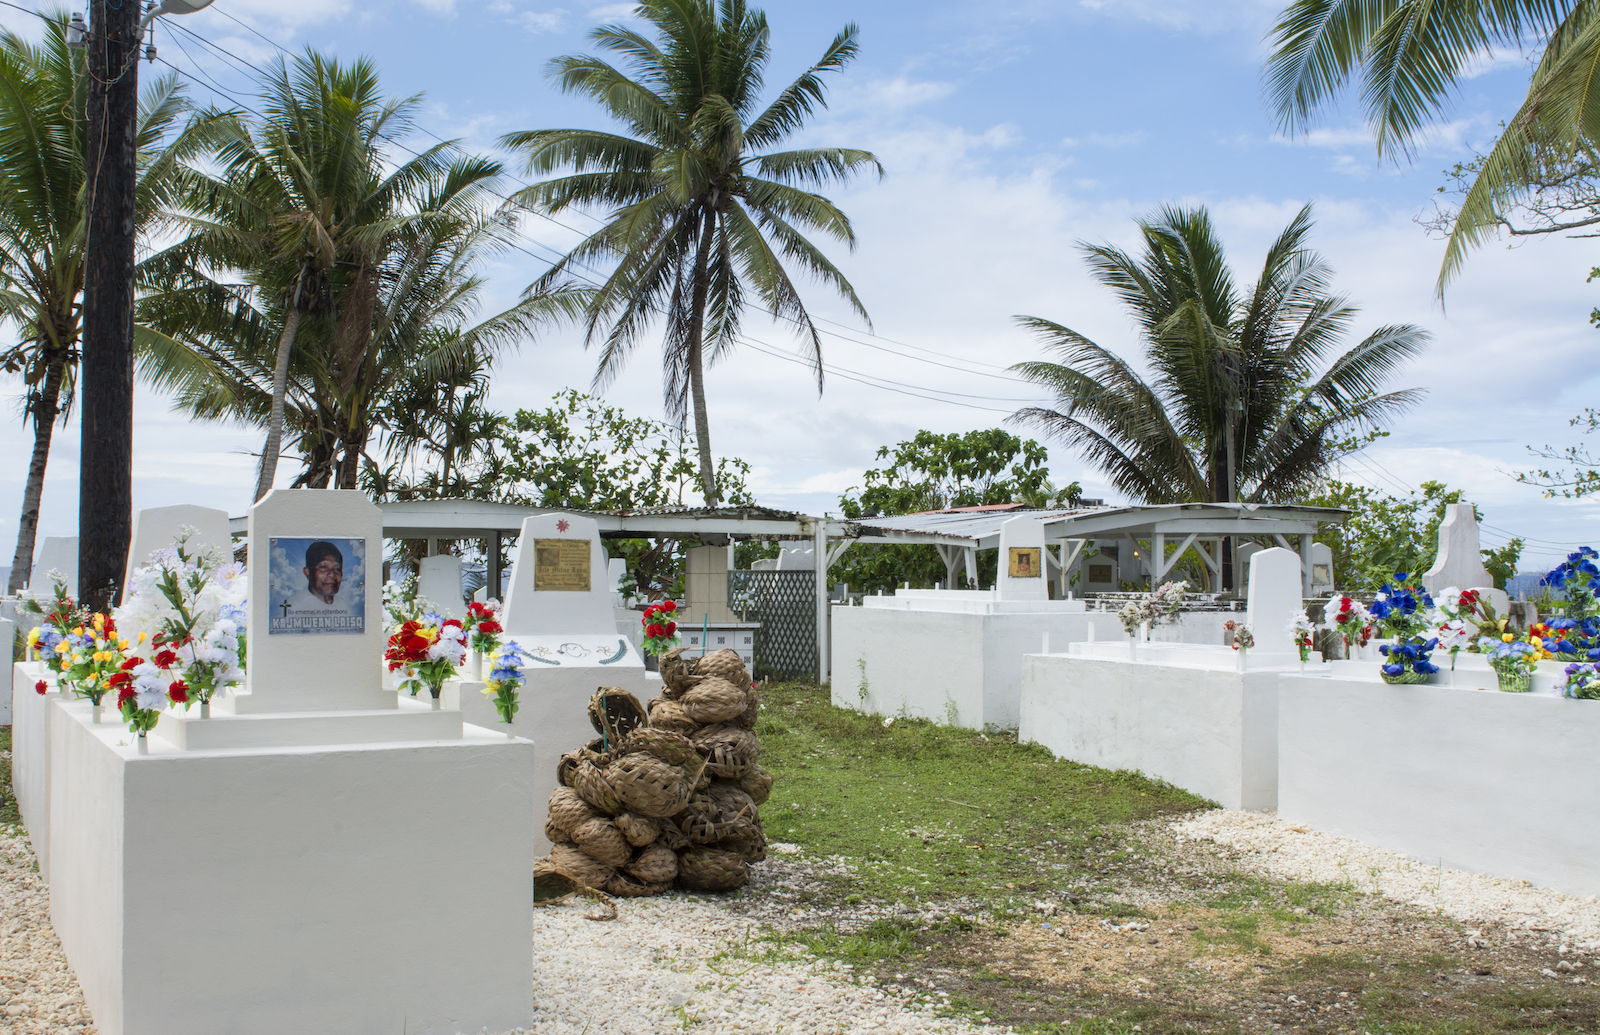 a cemetery with photos of people on the stones and palm trees in the background